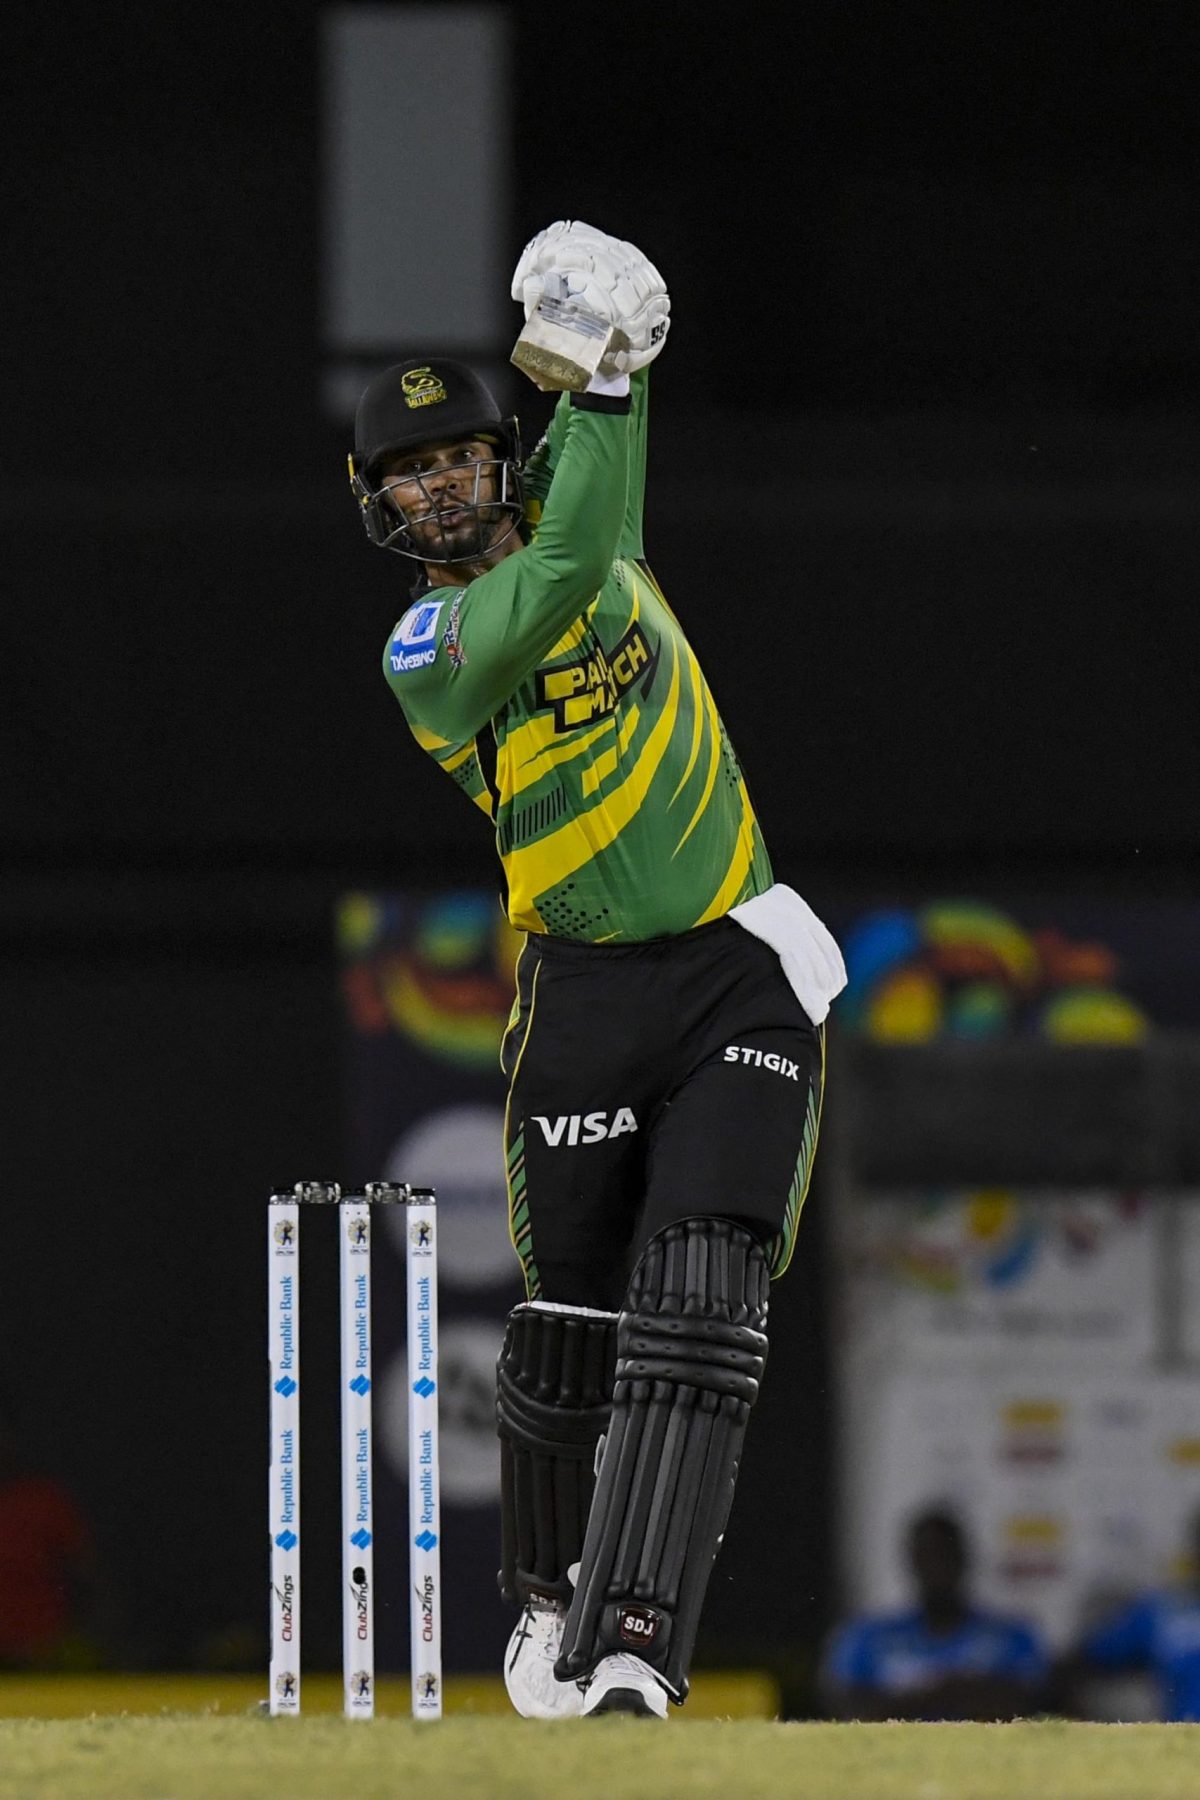 KING IN ALL HIS GLORY!  Brandon King was
his usual royal self in making the top score of 81
(Credit: CPL via Getty Images)